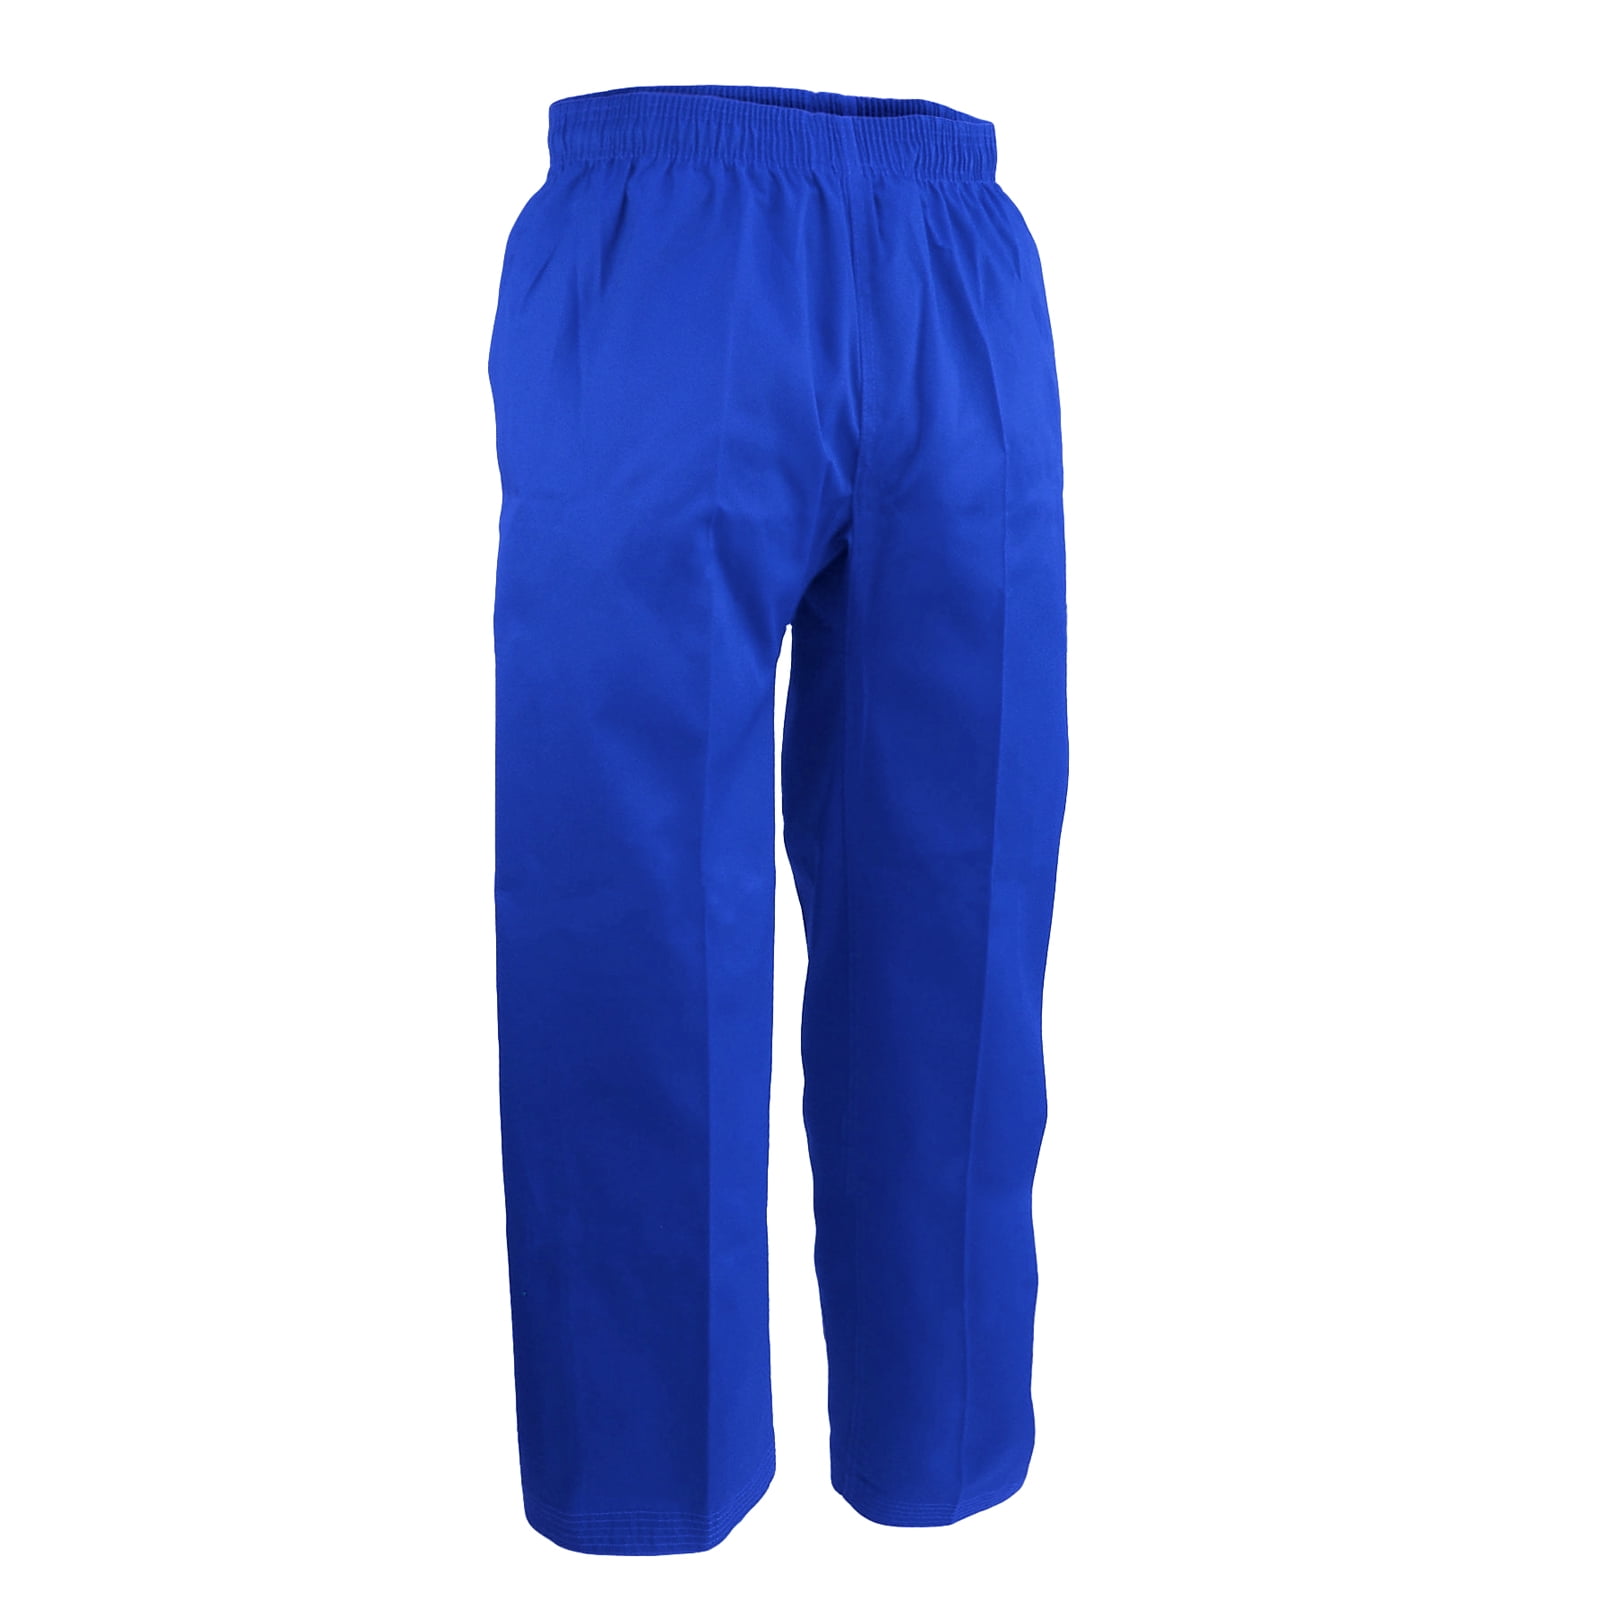 White Karate Trousers are perfect for Martial Arts Training - Enso Martial  Arts Shop Bristol